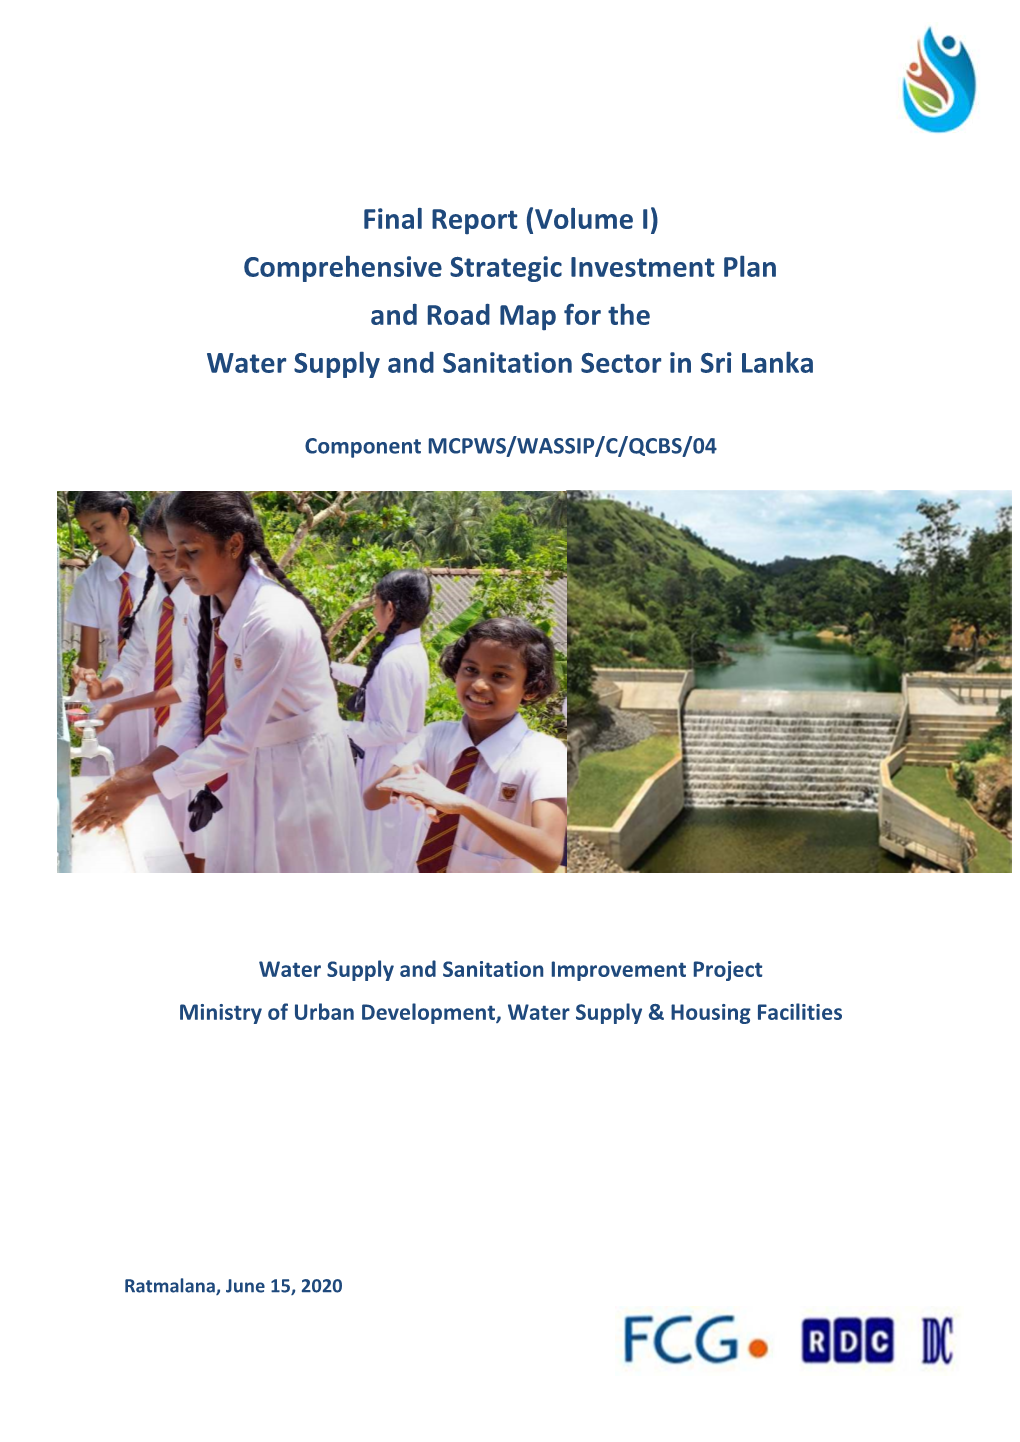 Final Report (Volume I) Comprehensive Strategic Investment Plan and Road Map for the Water Supply and Sanitation Sector in Sri Lanka